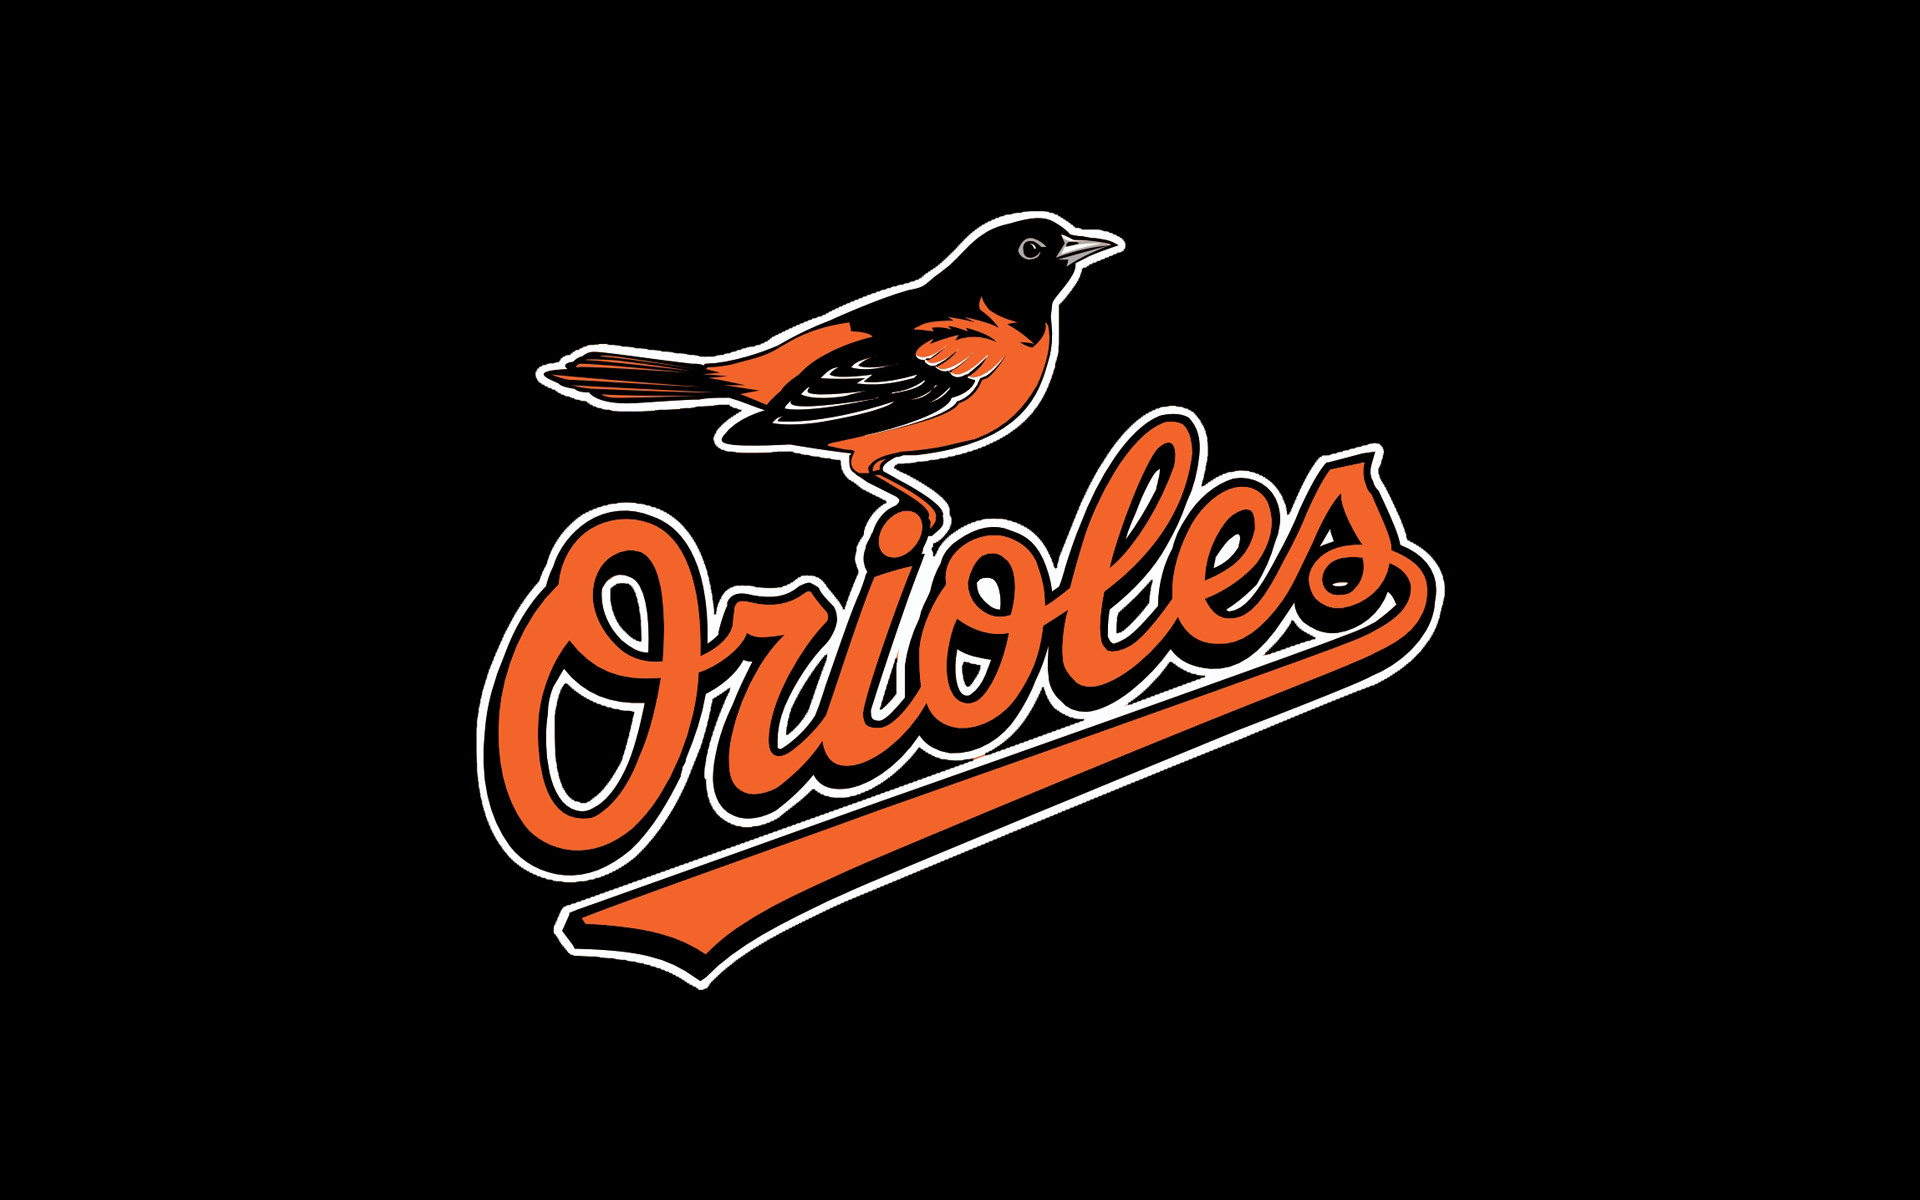 1920x1200 ... WallpaperSafari Baltimore Orioles Wallpapers Images Photos Pictures  Backgrounds ...